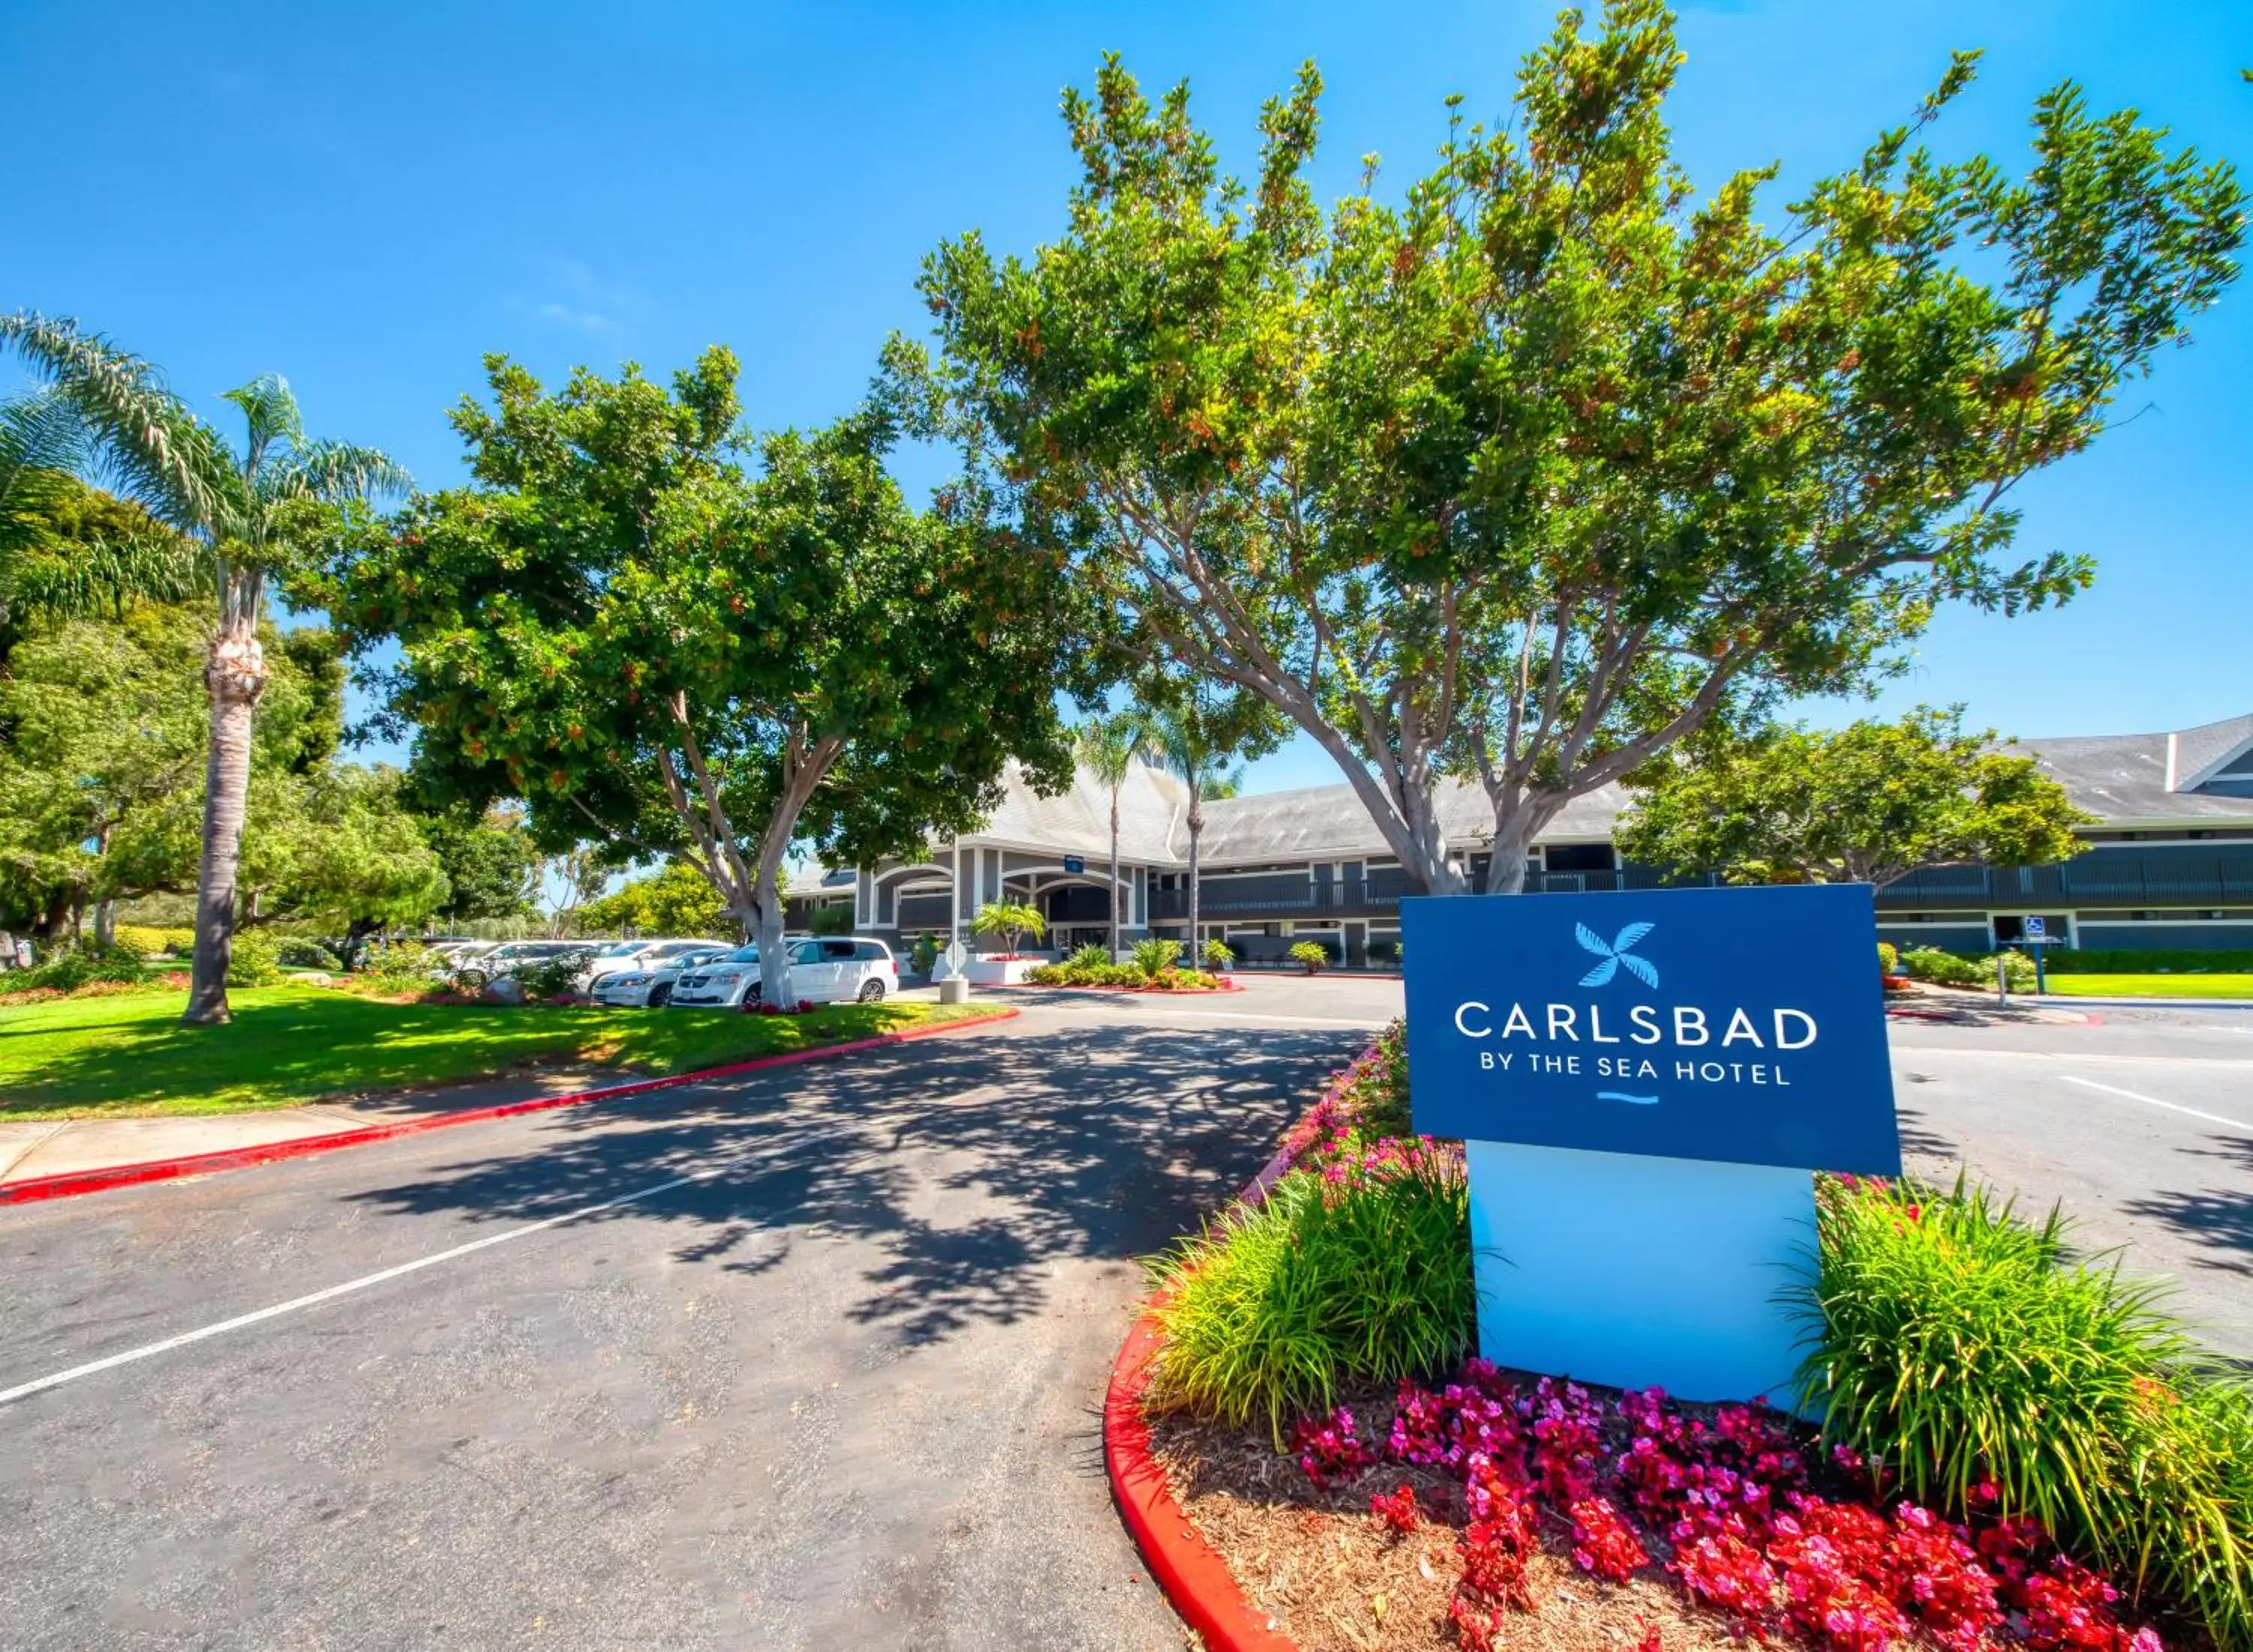 Property building in Carlsbad by the Sea Hotel